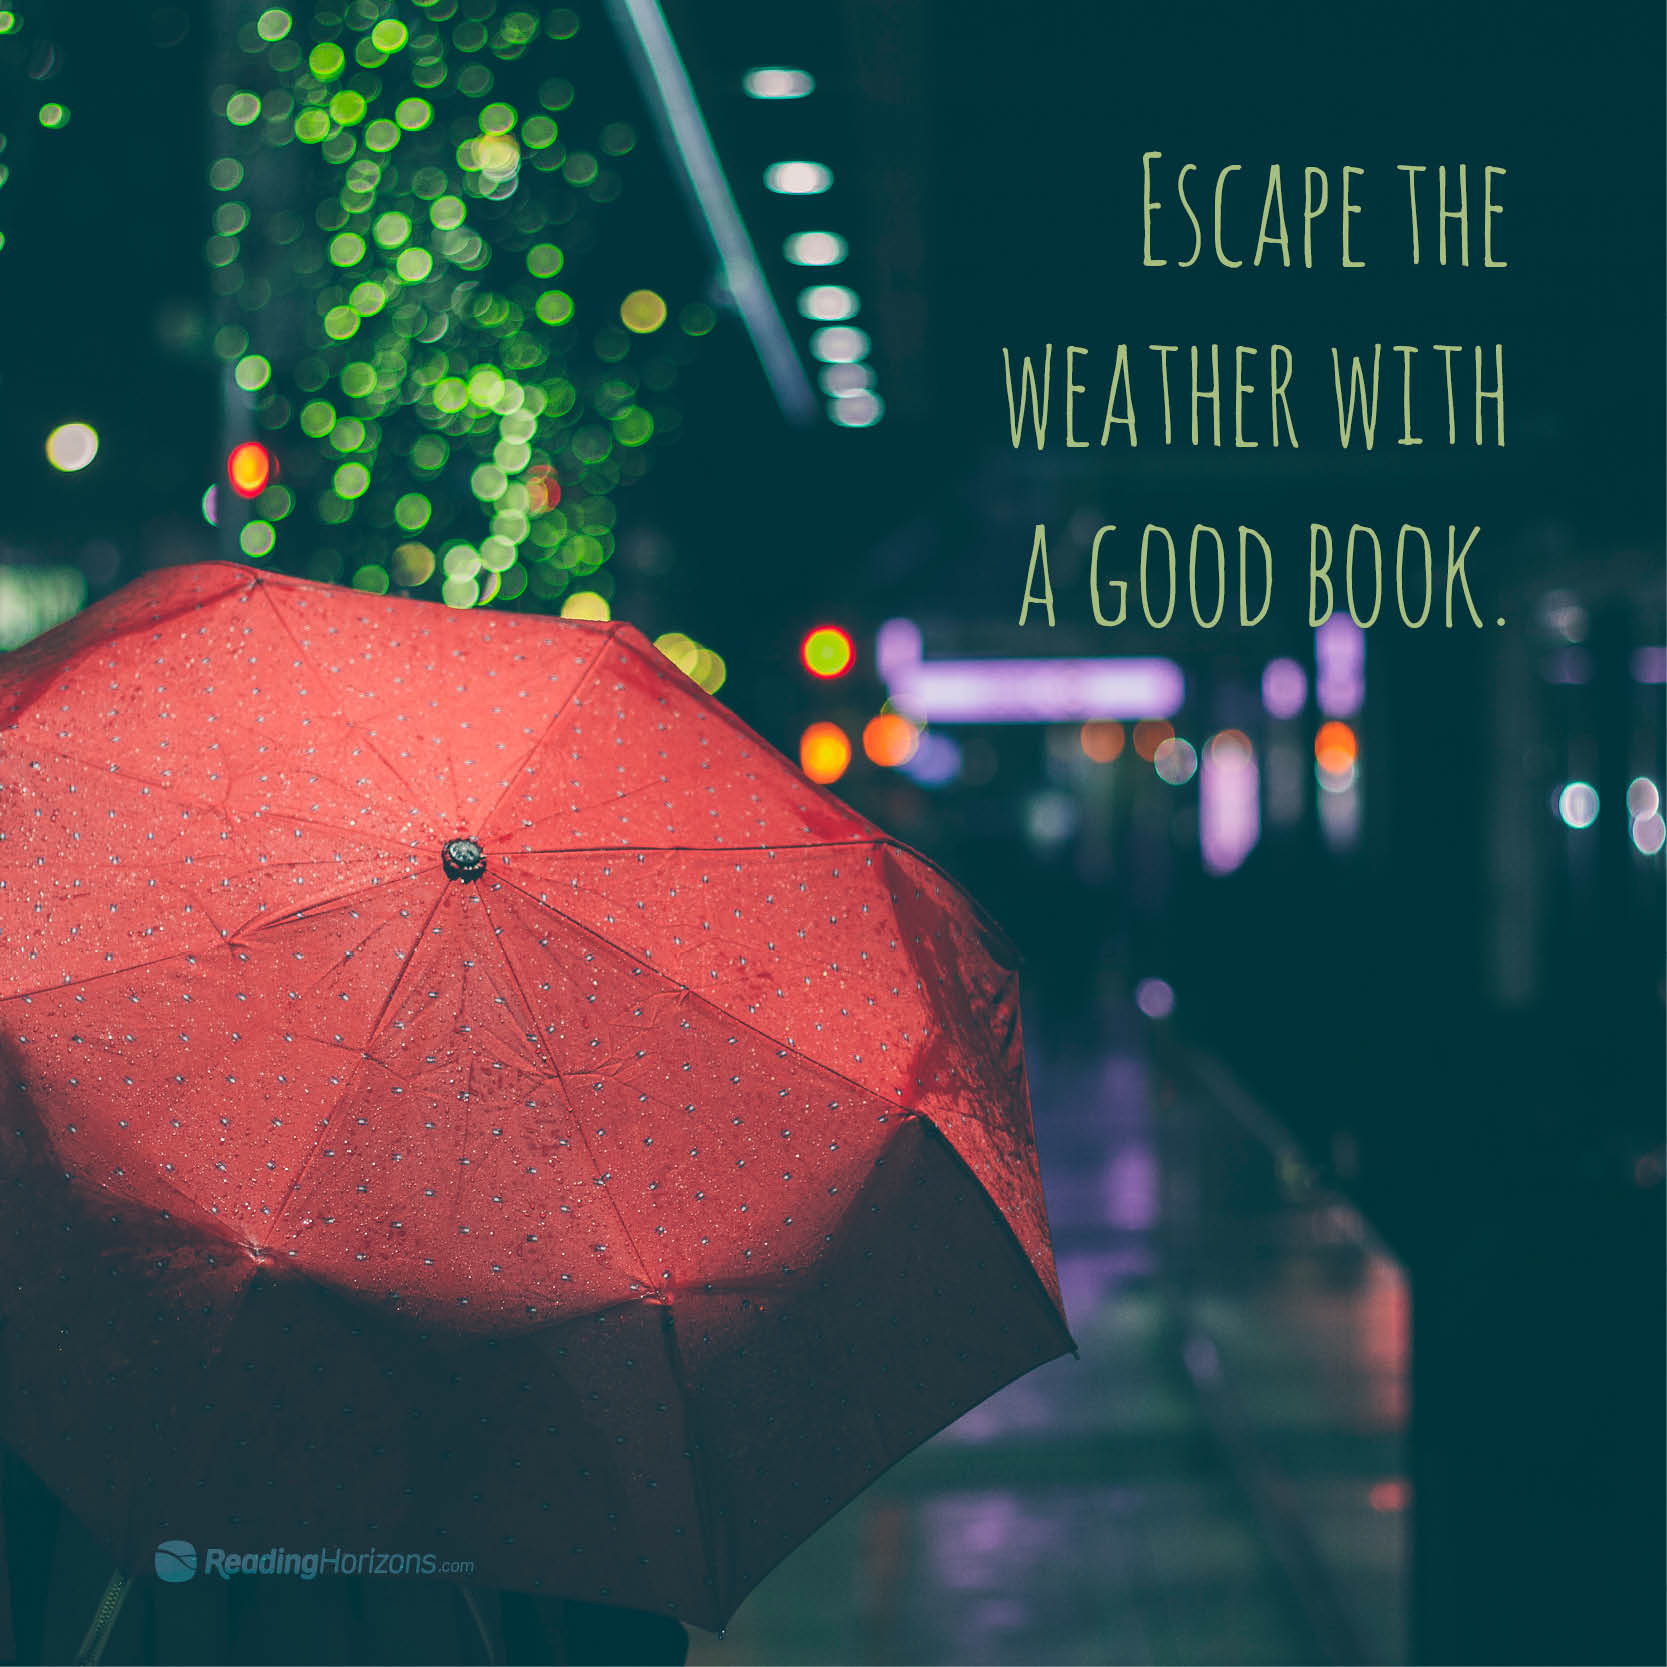 A meme of a red umbrella with the words "Escape the weather with a good book."